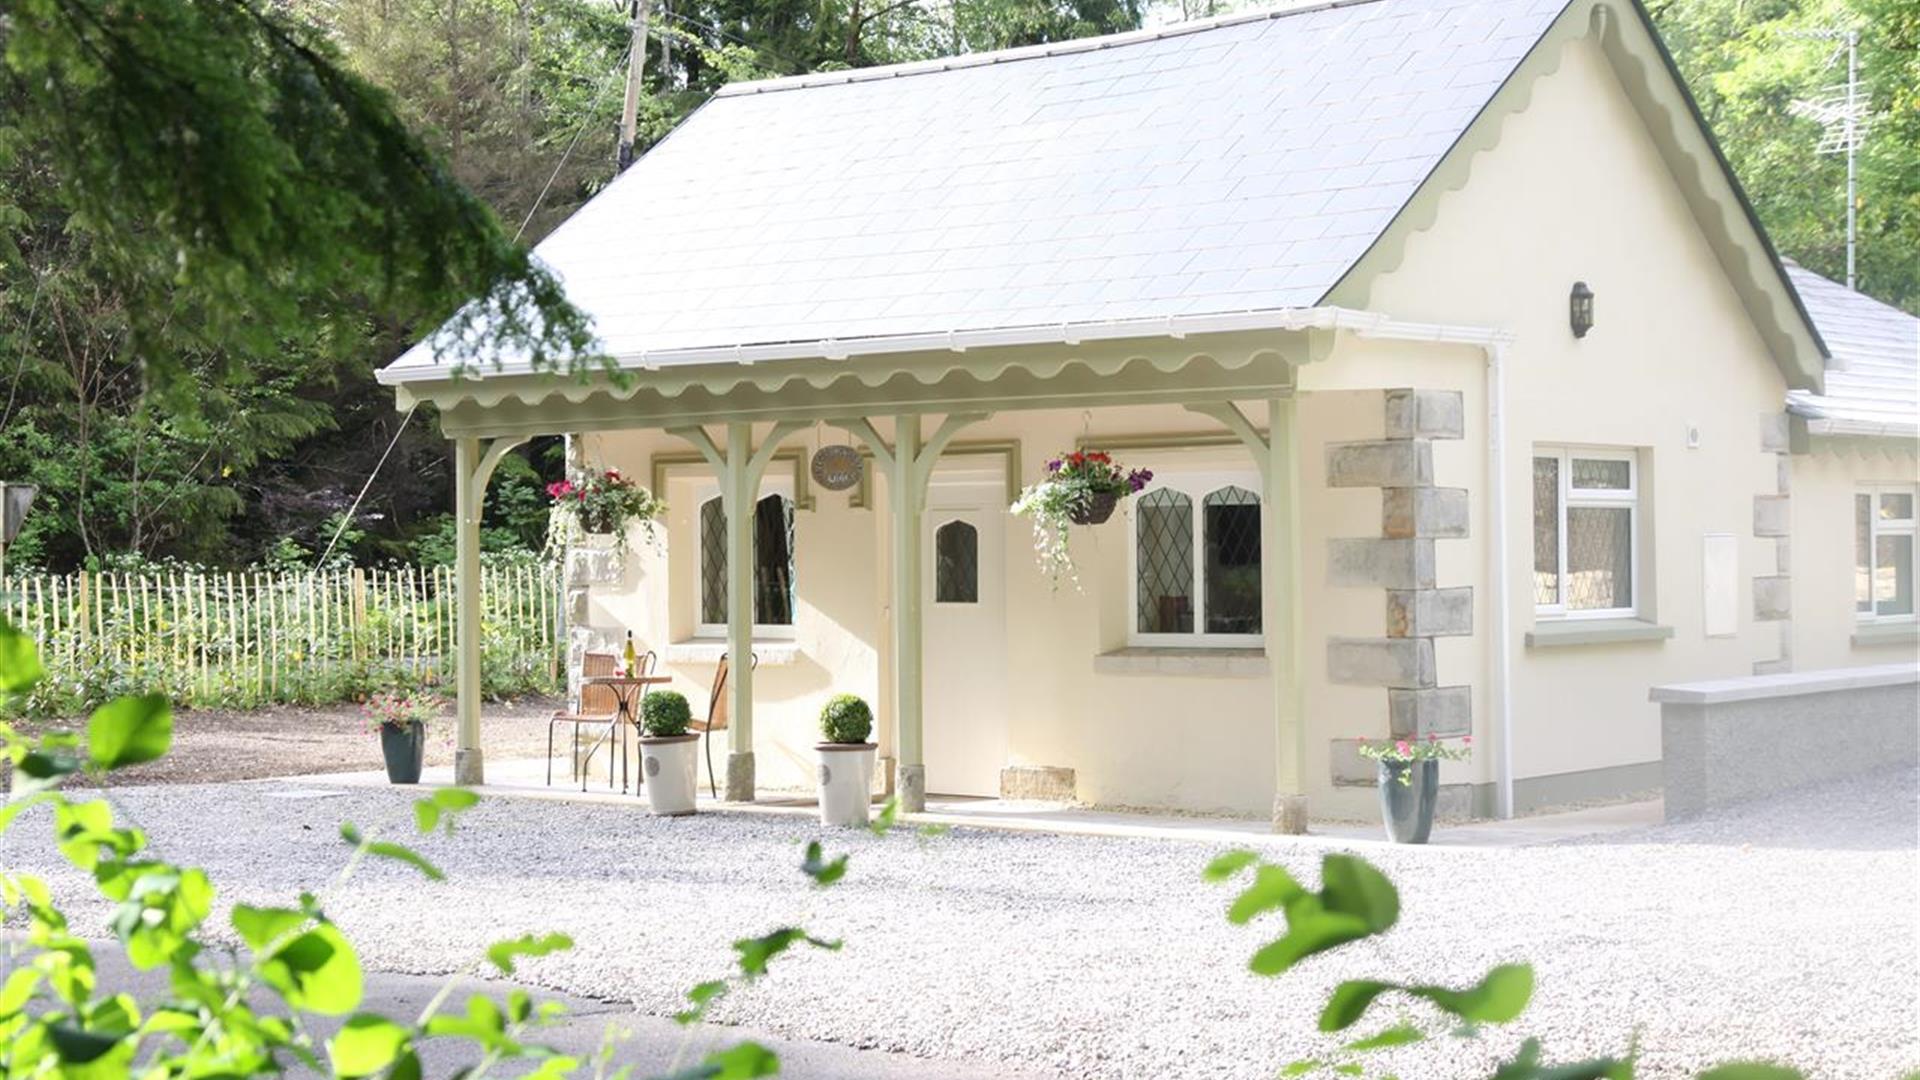 Blessingbourne Gate Lodge with outside seating area